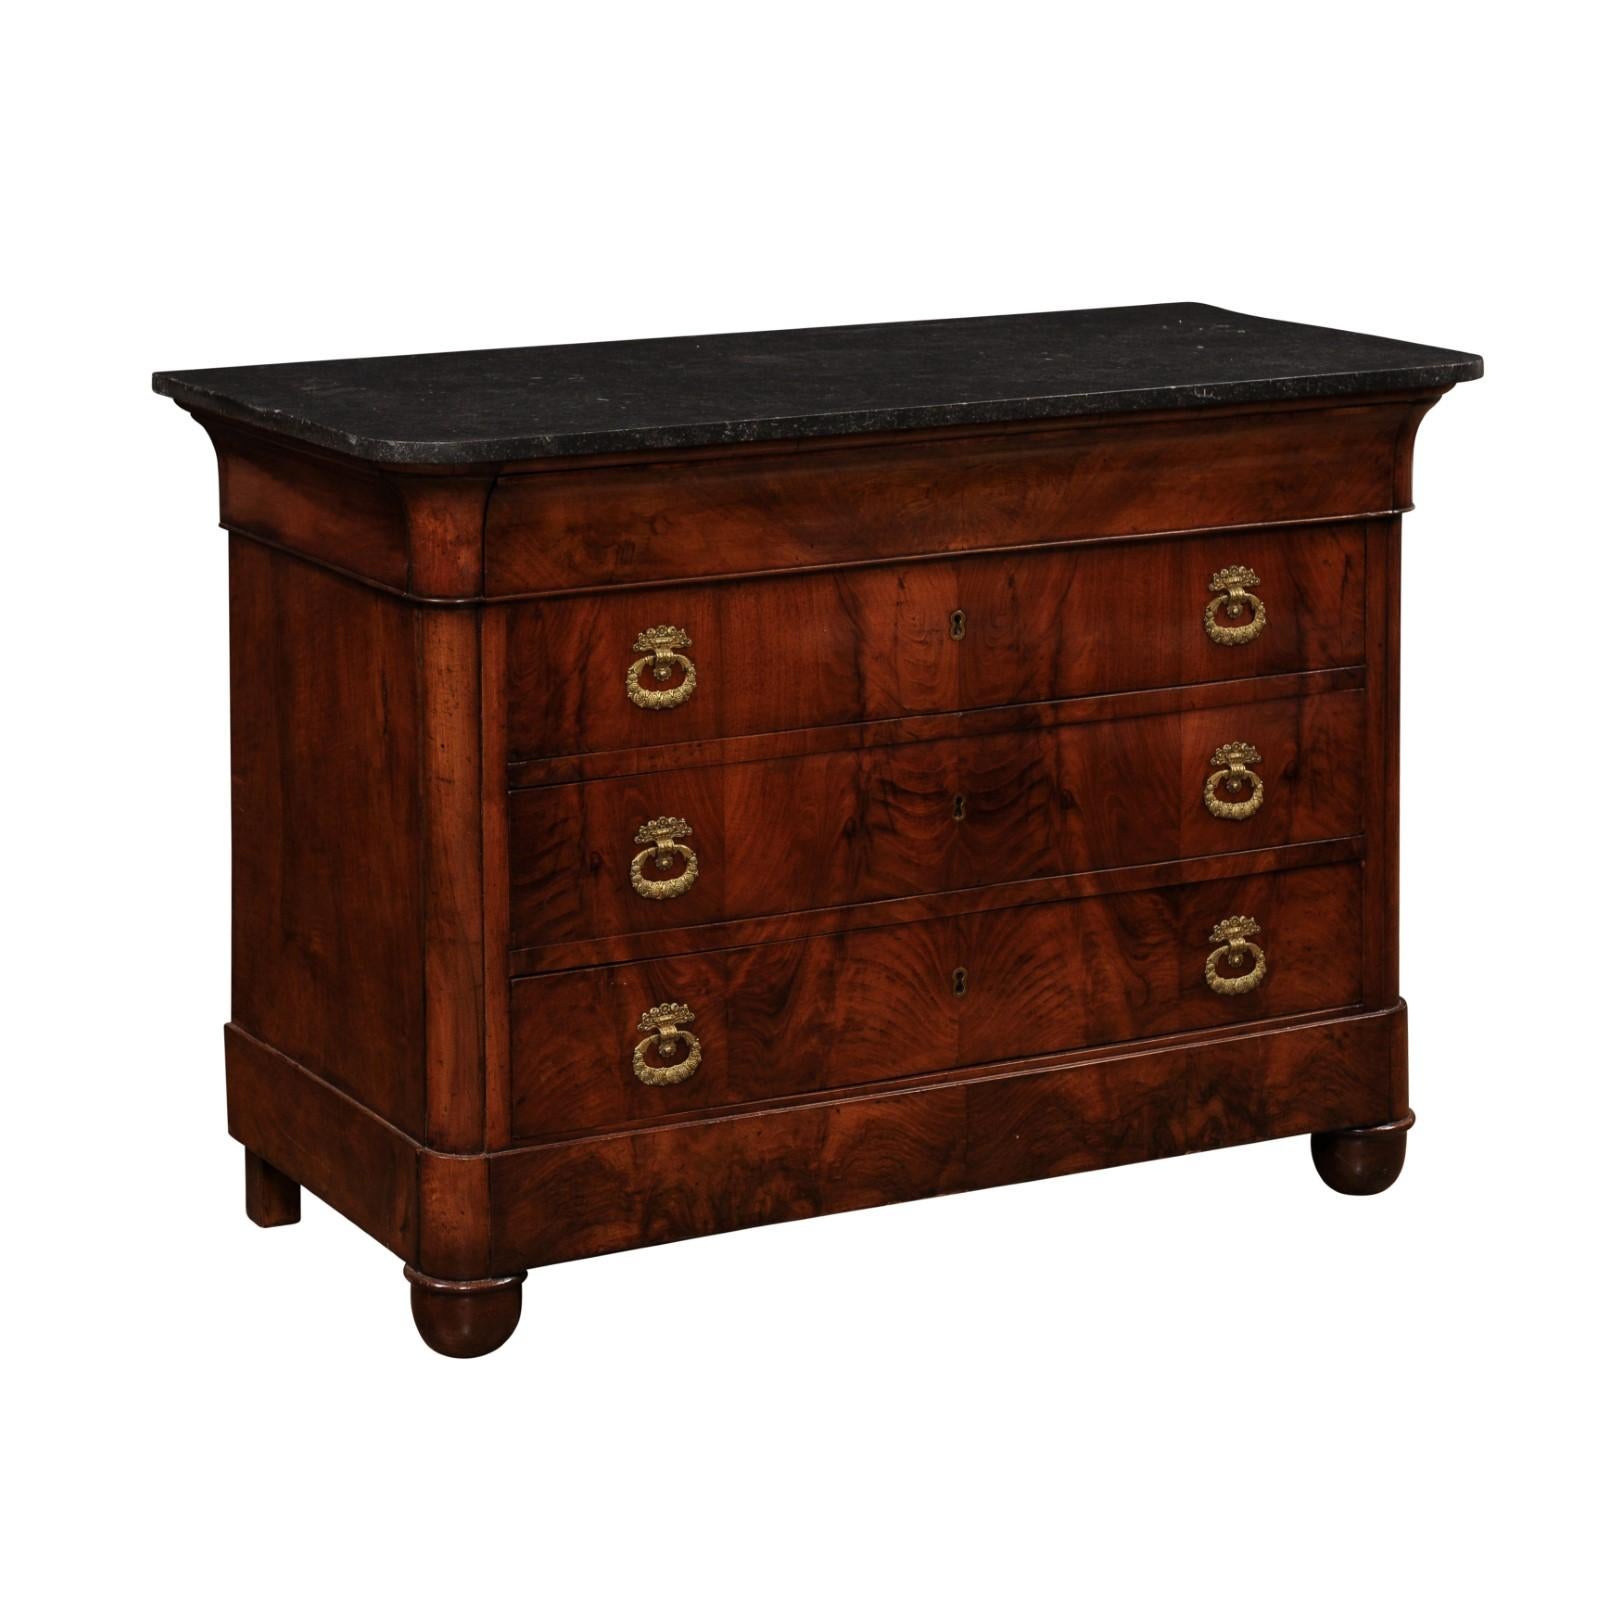 An Italian Empire style walnut commode from circa 1890 with black marble top, four drawers, column shaped side supports and ornate bronze hardware. Step into the grandeur of late 19th-century Italian design with this exquisite Italian Empire style